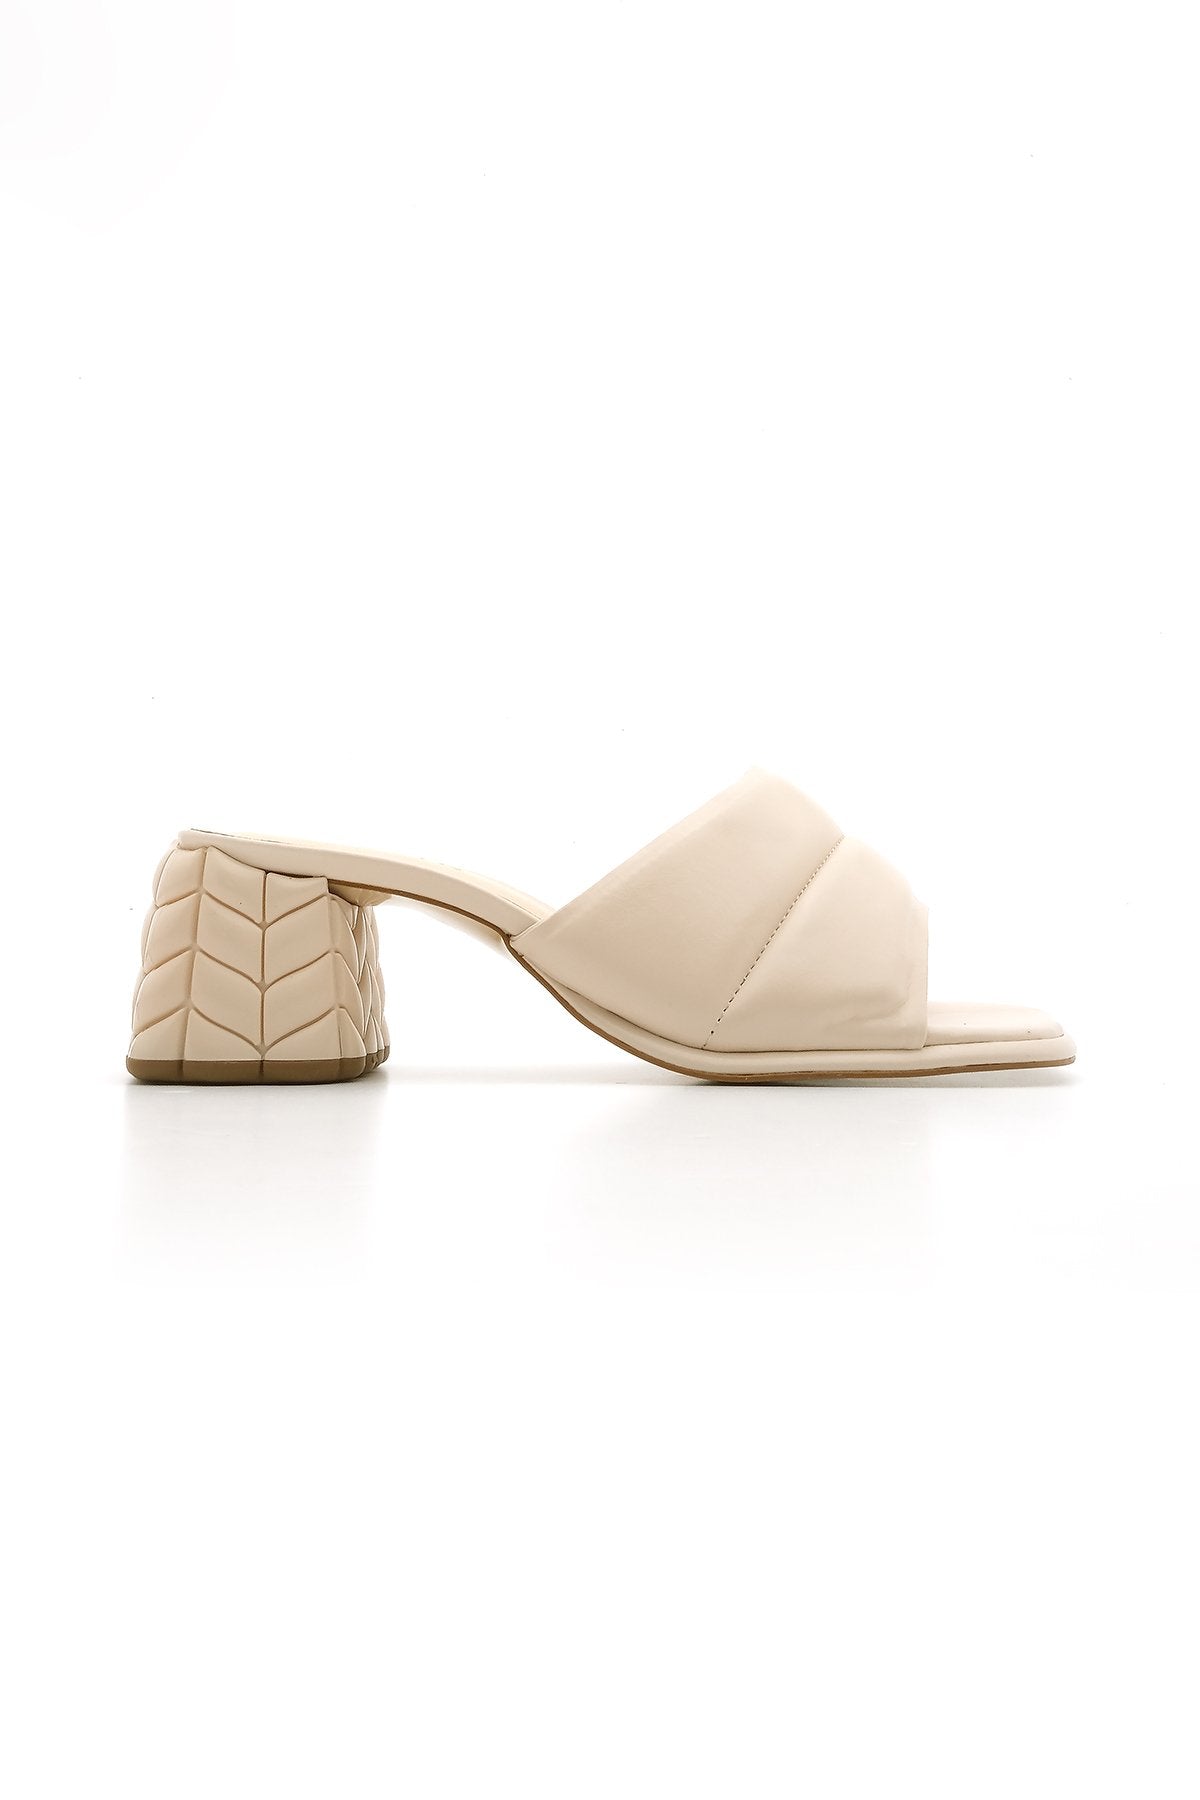 Women's Thick Heeled Slippers Denves - Beige